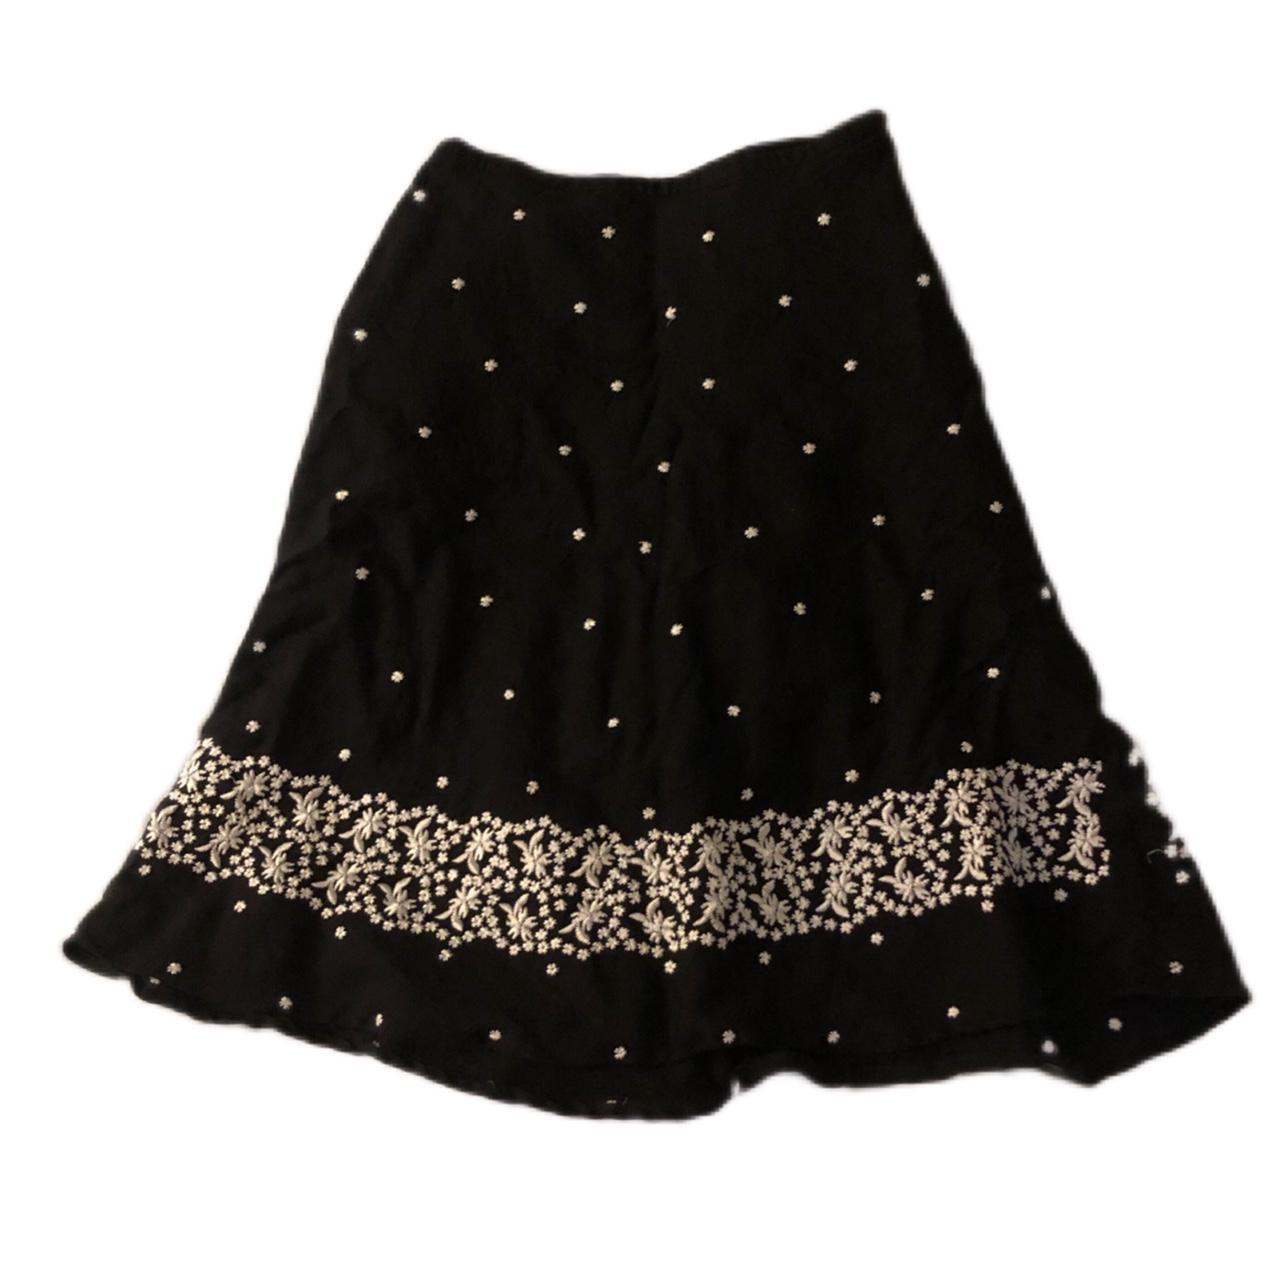 Appraisal black and white floral embroidery skirt...